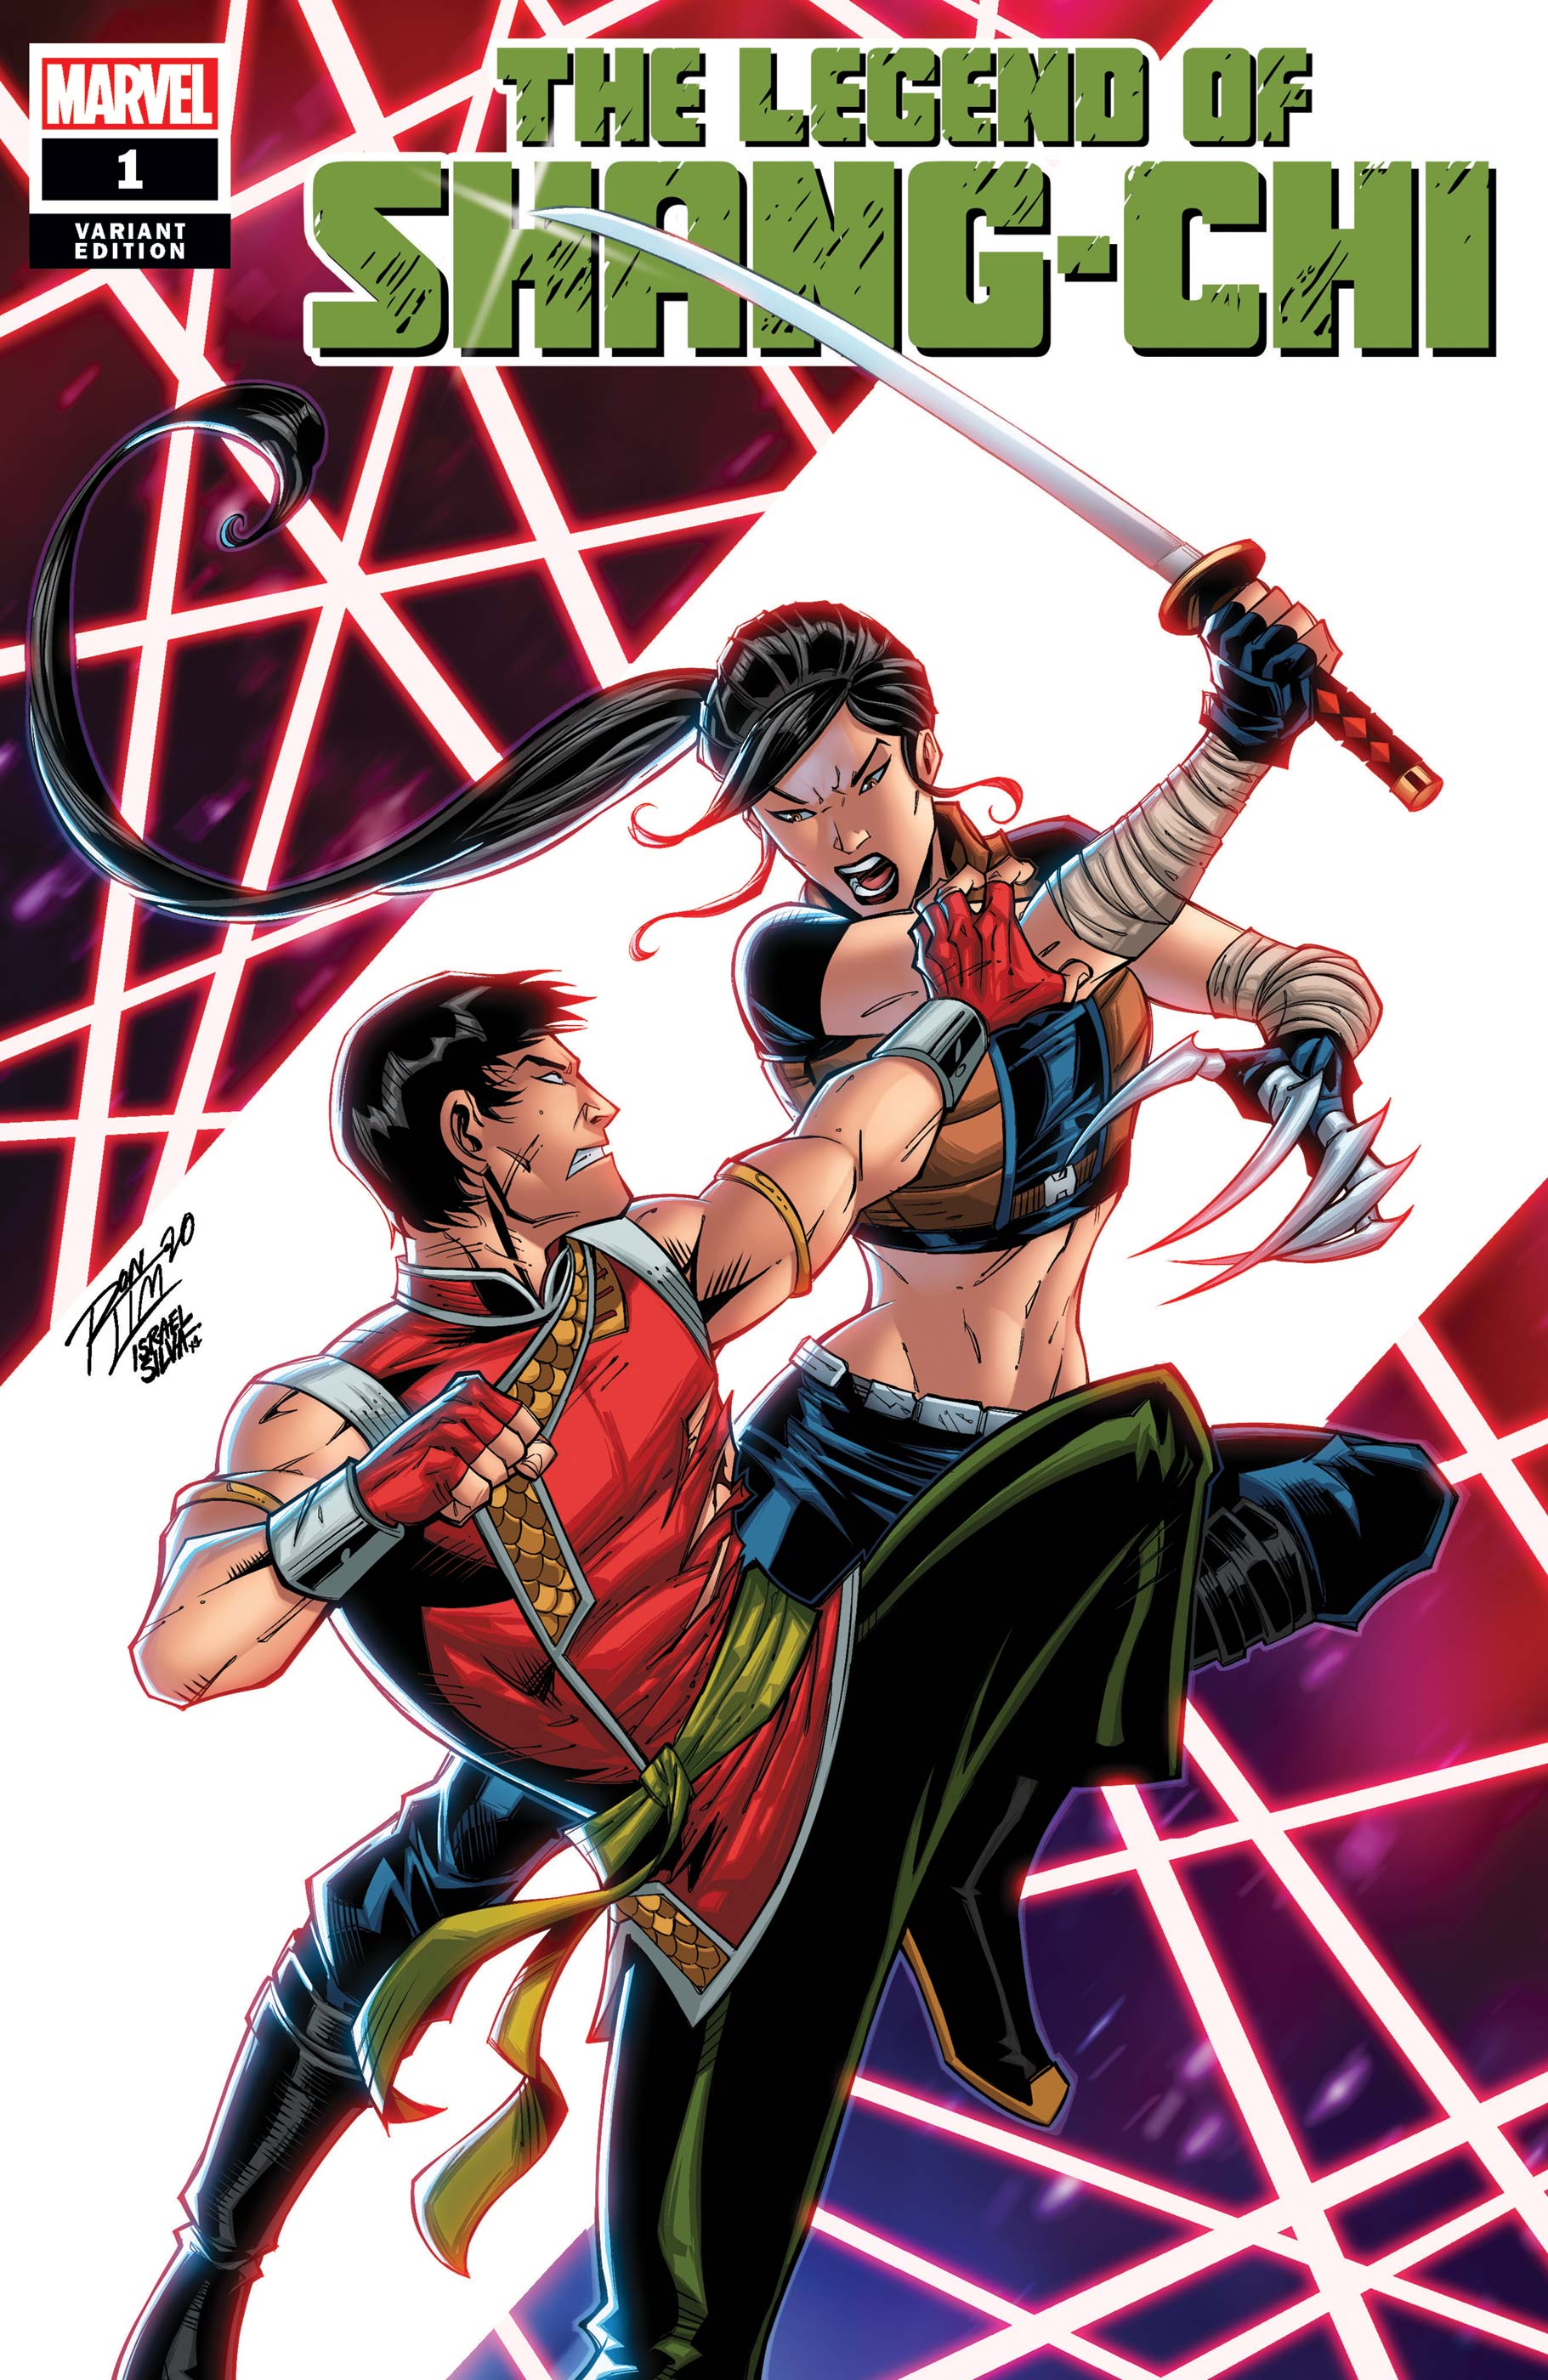 The Legend Of Shang-Chi (2021) #1 (Variant)